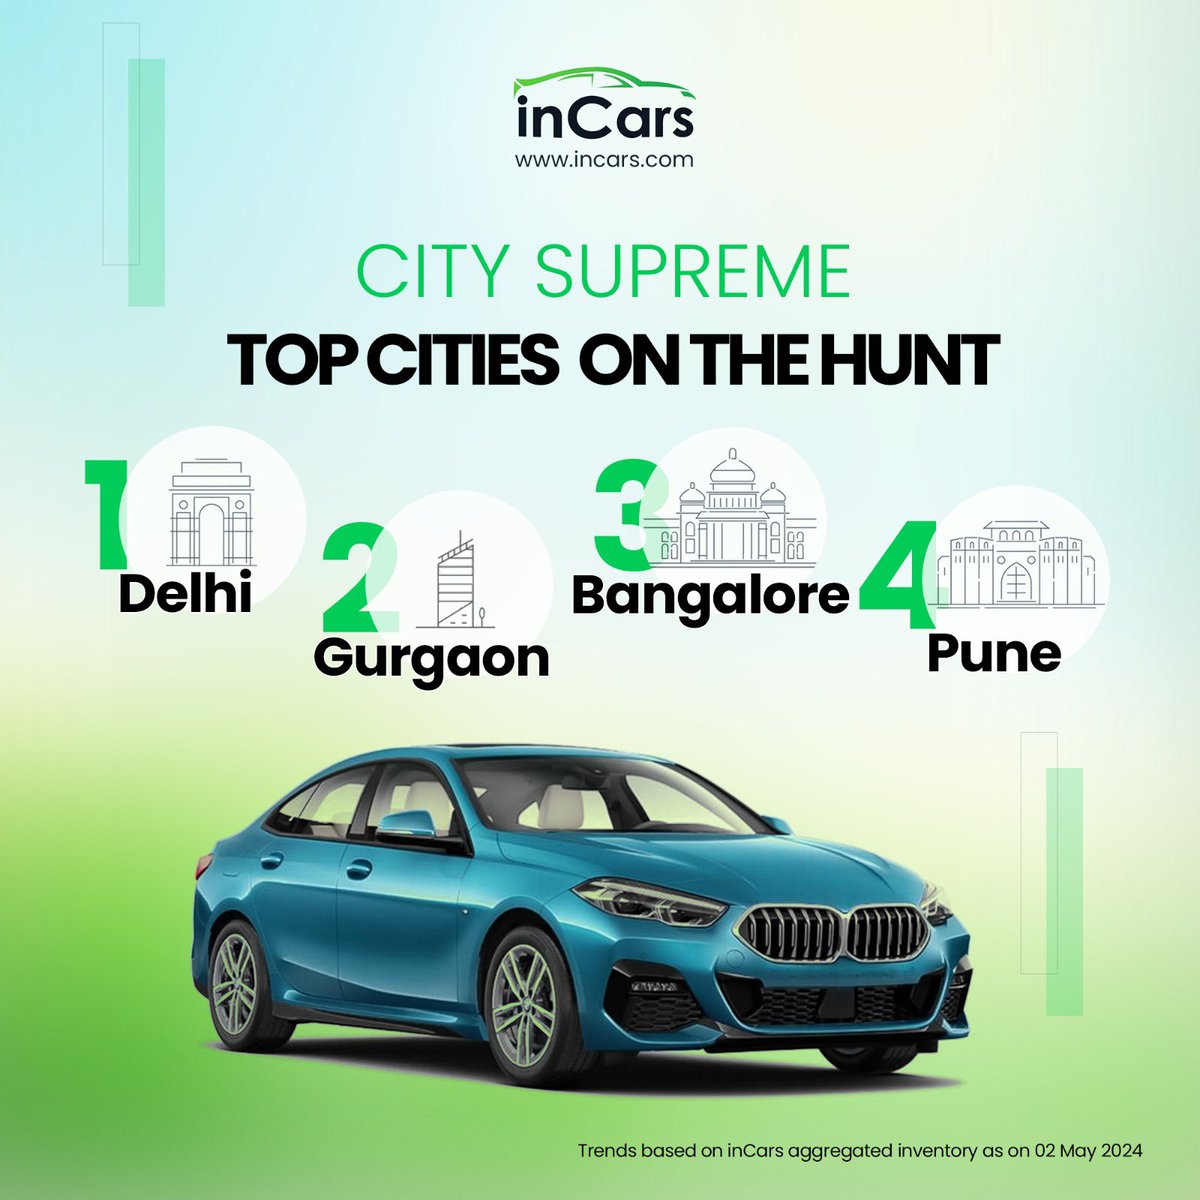 Top Indian Cities Revealed in the Weekly Race for Used Cars, only on Daily Wheels by inCars! 🏙️ Today we  zoom in on the cities leading the charge 🚗 Stay tuned! 🔍 #DailyWheels #inCars #inCarsAI #SecondHandCars #UsedCarsMarket #UsedCars #TopCities #UsedCarsIndia #panIndia 🇮🇳